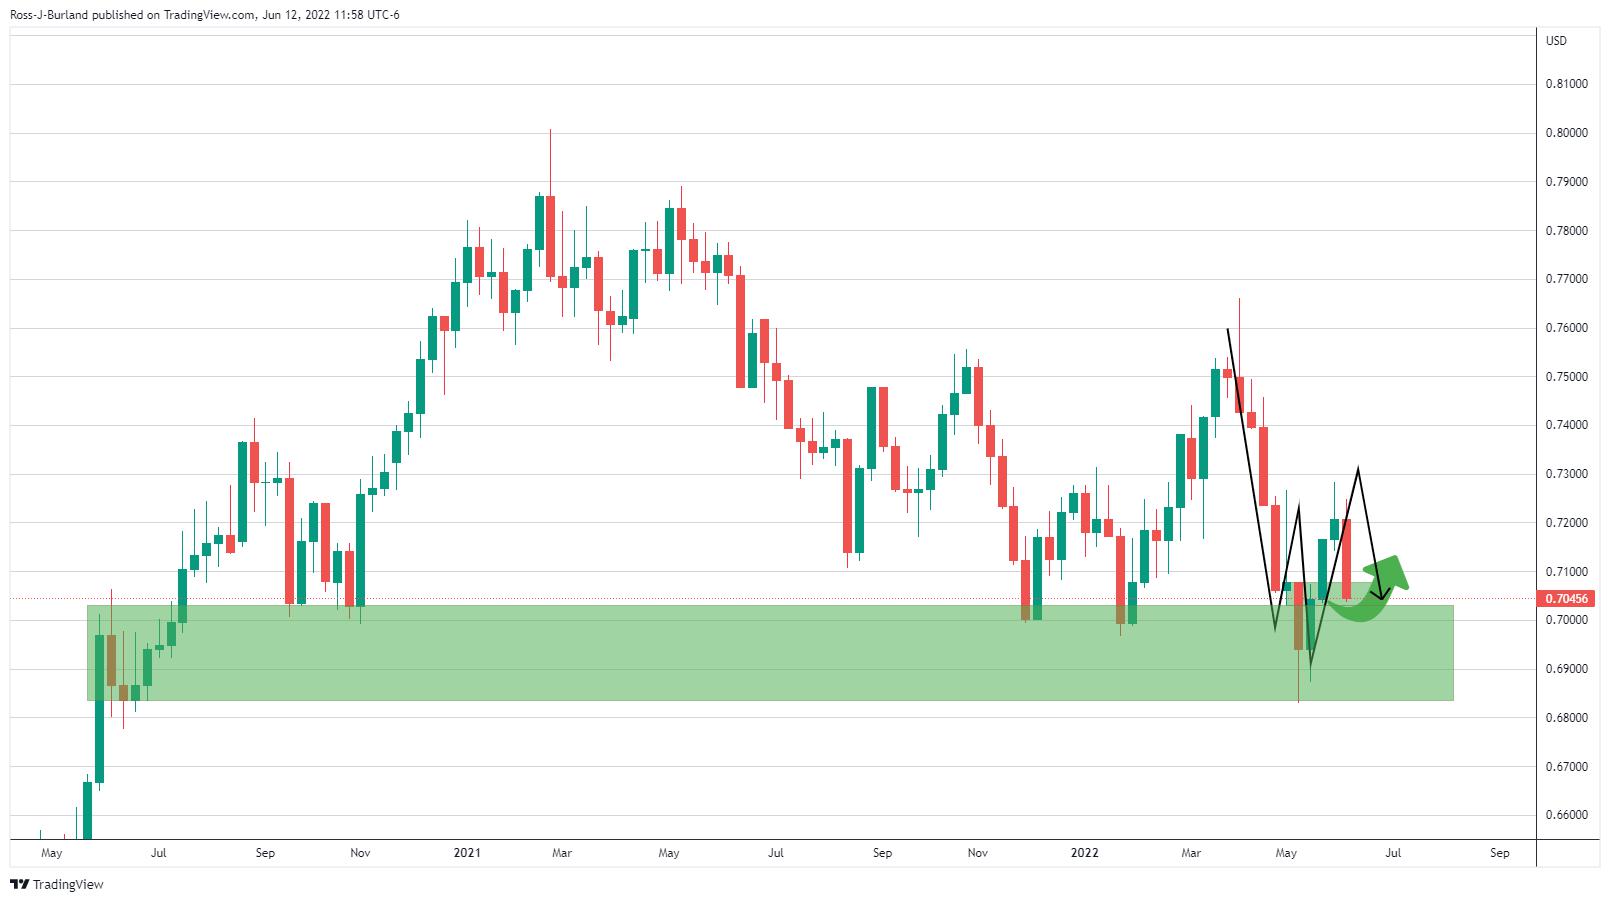 AUD/USD Price Analysis: There's something here for both the bulls and bears